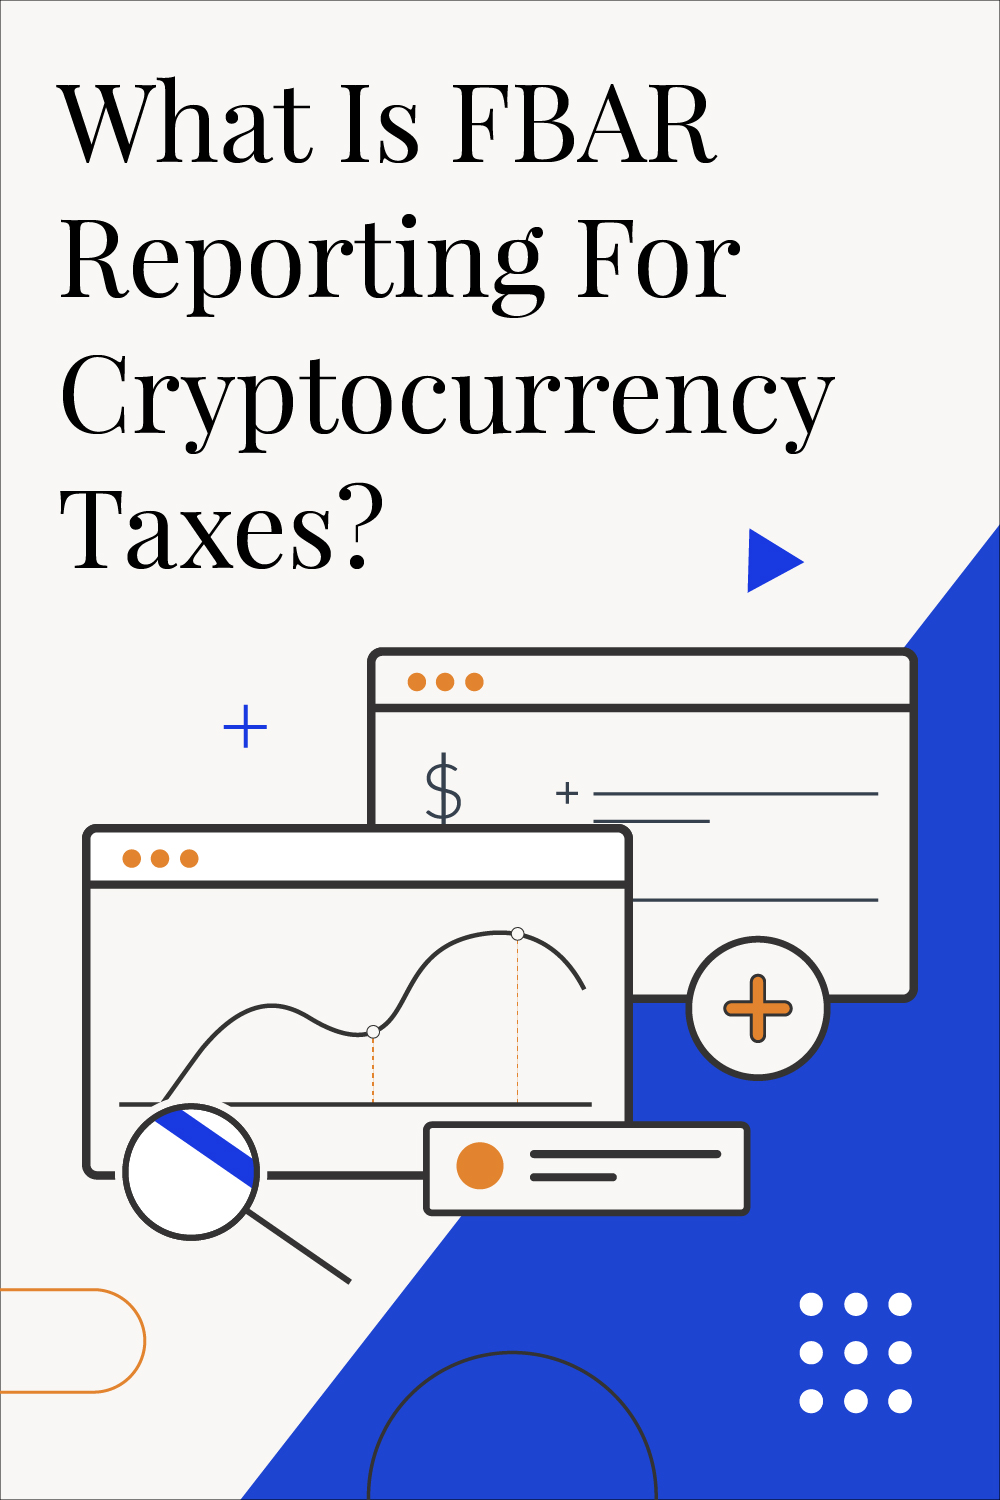 What Is FBAR Reporting For Cryptocurrency Taxes?